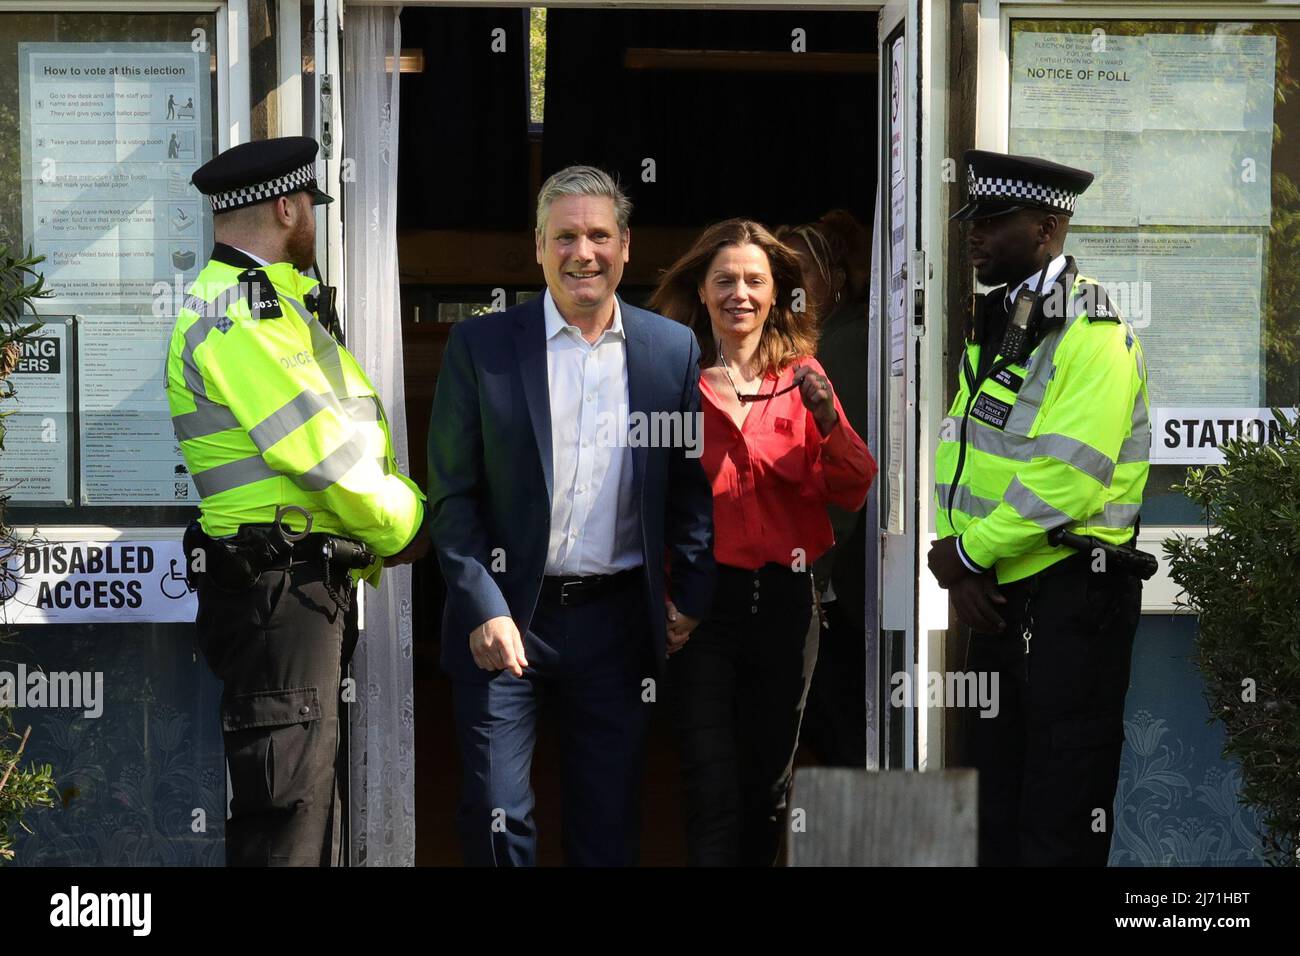 London, UK. 5th May 2022. (220505) -- LONDON, May 5, 2022 (Xinhua) -- Britain's Labour Party leader Keir Starmer (2nd L) and his wife Victoria Starmer leave a polling station after voting in local elections in London, Britain on May 5, 2022. Polling stations across Britain opened early Thursday as voters went for local elections. (Photo by Tim Ireland/Xinhua) Credit: Xinhua/Alamy Live News Stock Photo